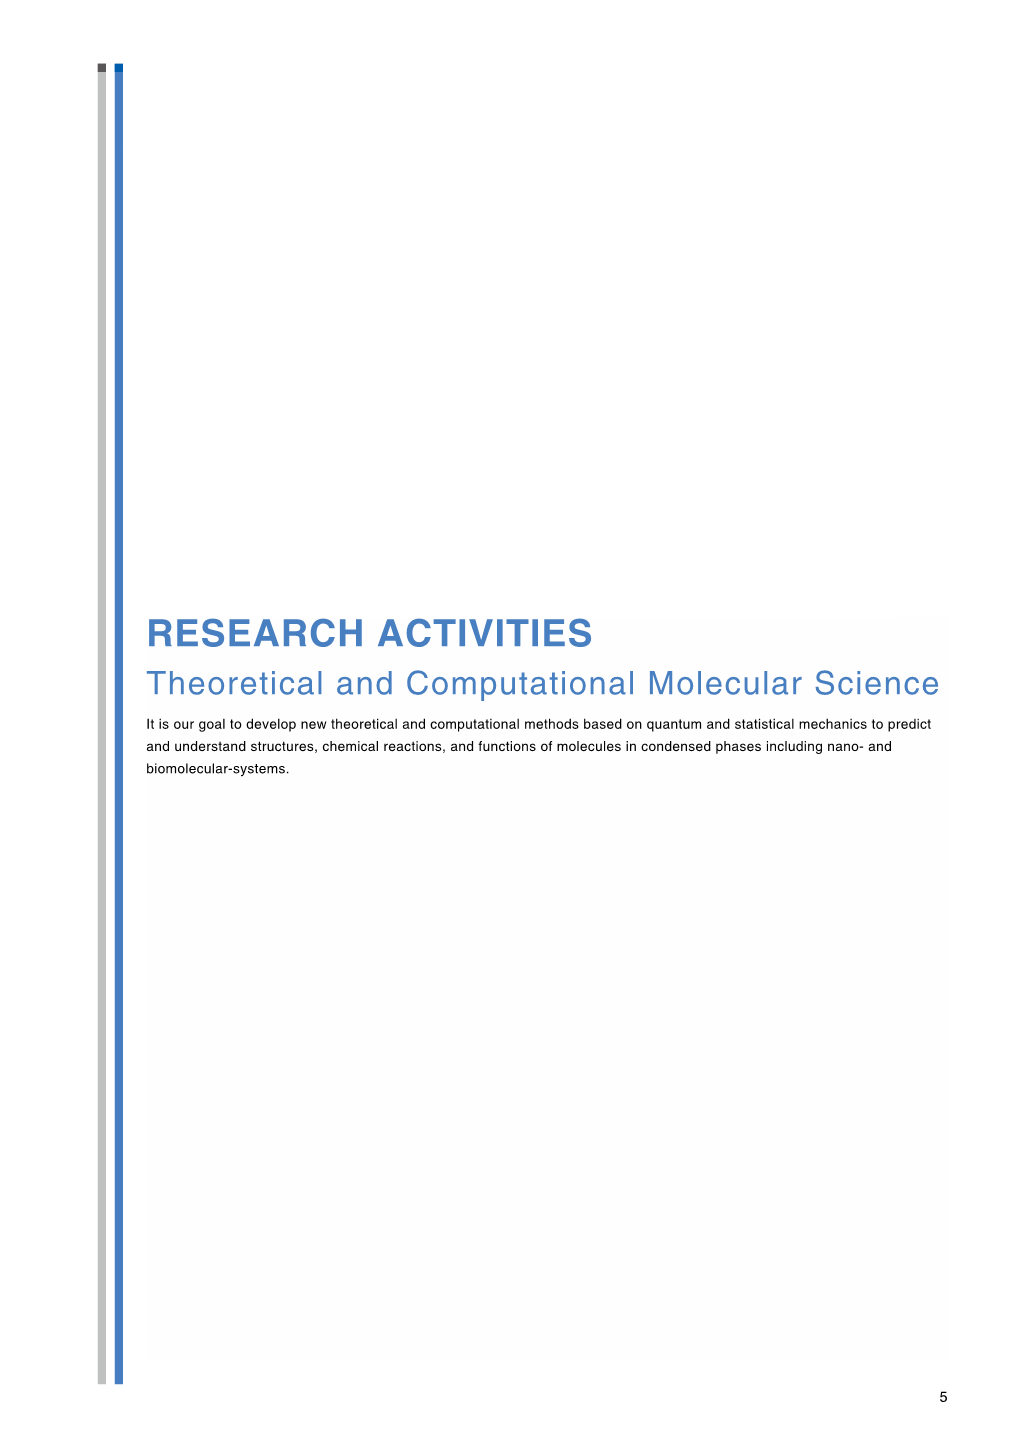 RESEARCH ACTIVITIES Theoretical and Computational Molecular Science